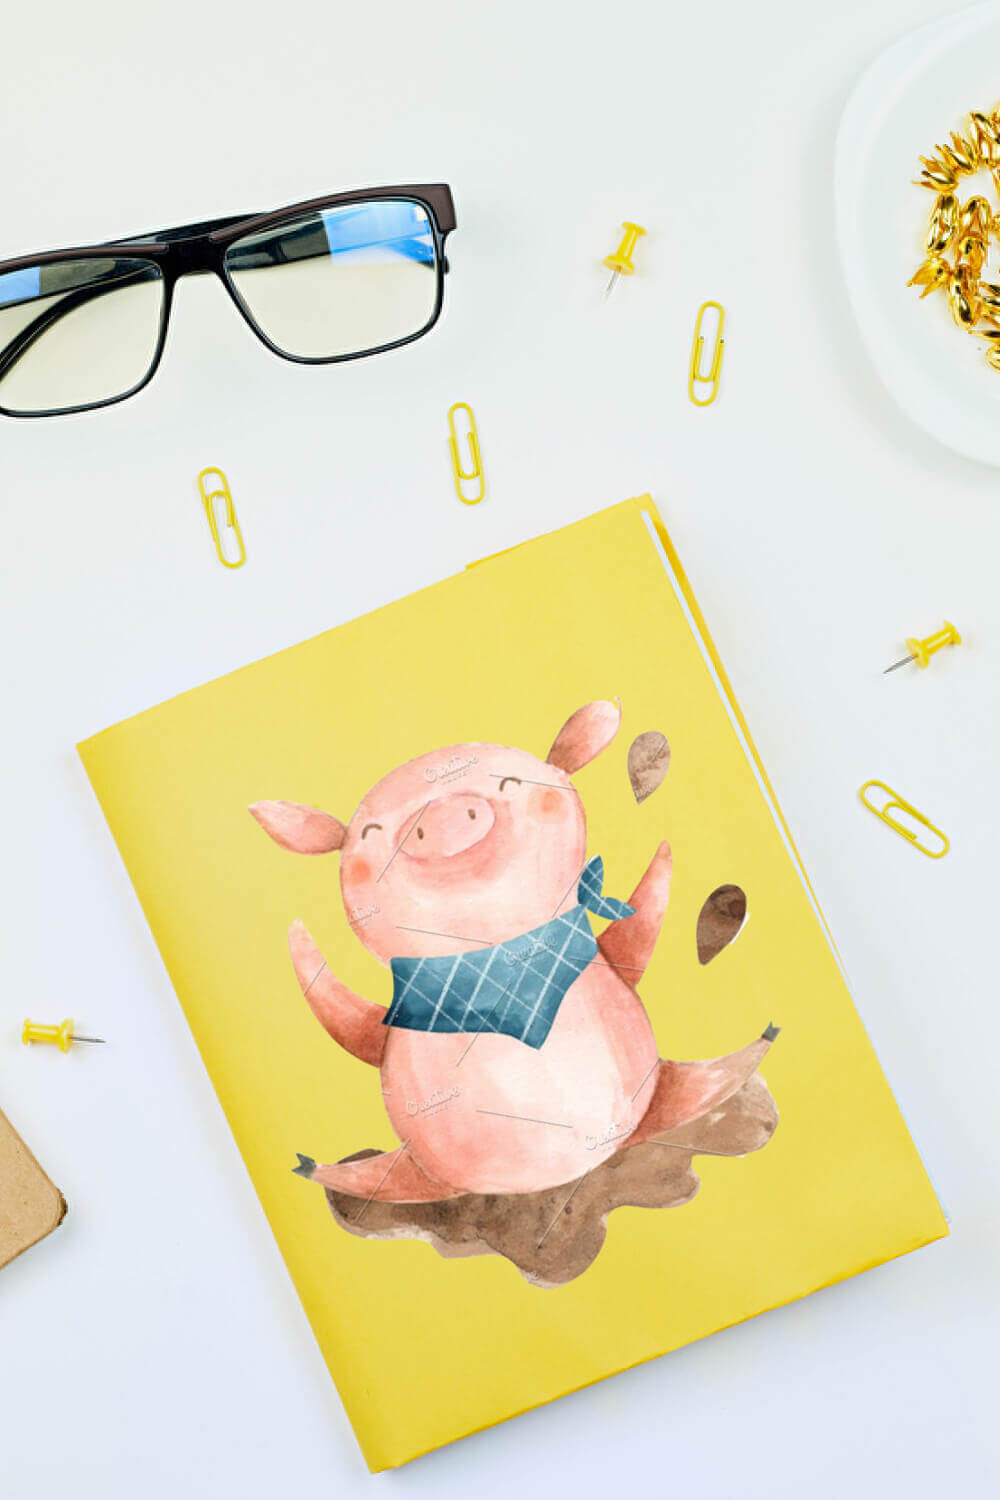 On the yellow card, there is a painted dancing happy pig.